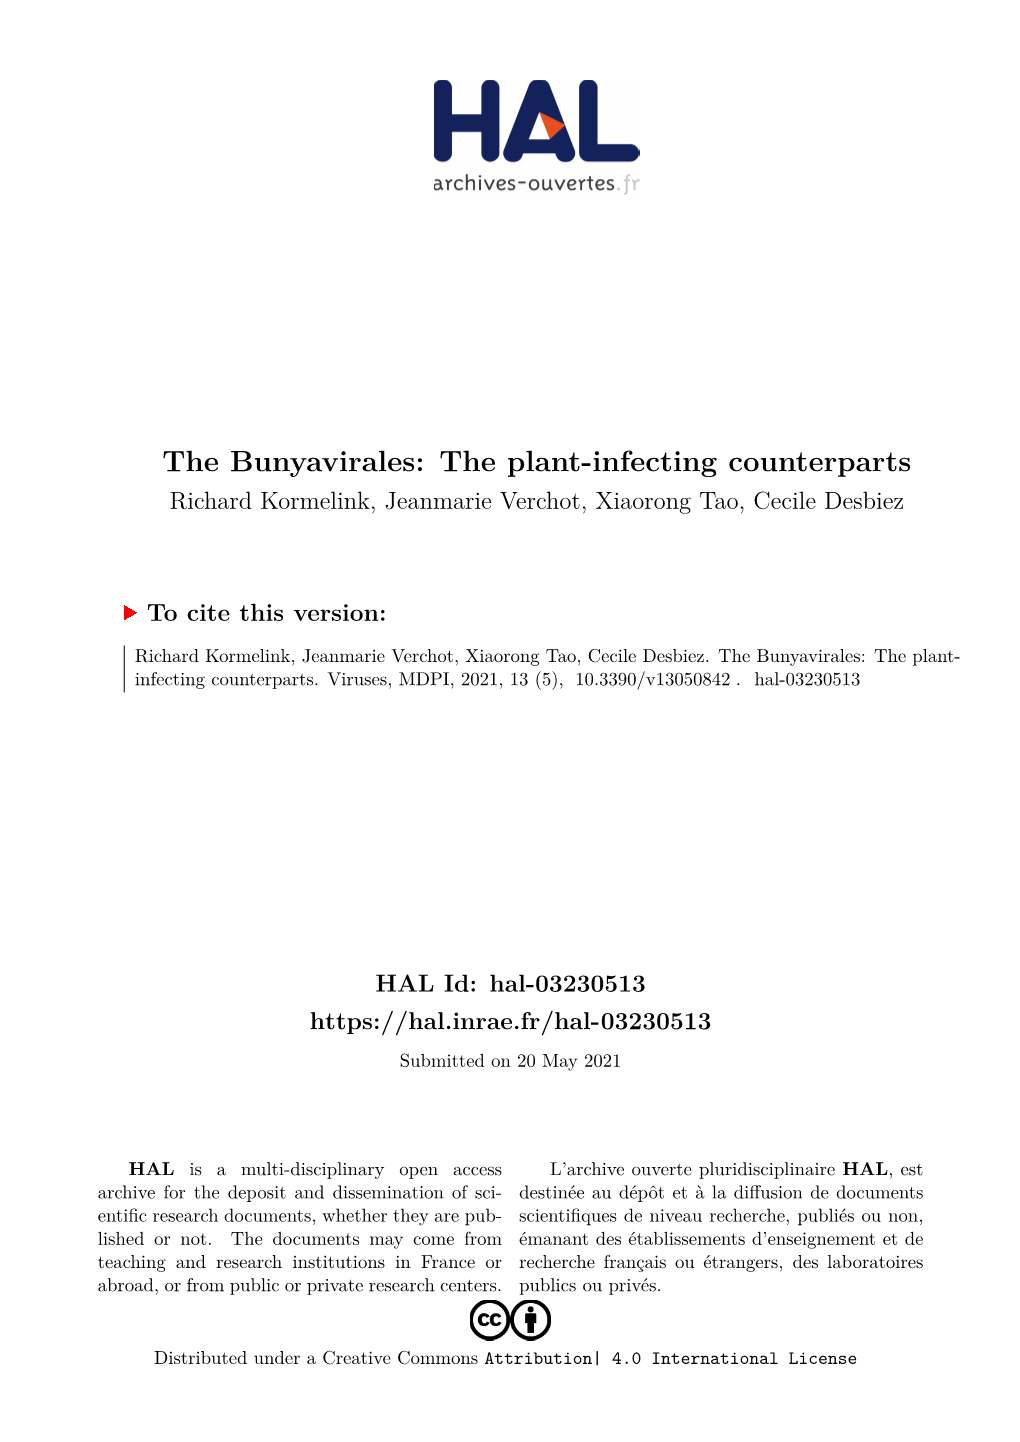 The Bunyavirales: the Plant-Infecting Counterparts Richard Kormelink, Jeanmarie Verchot, Xiaorong Tao, Cecile Desbiez